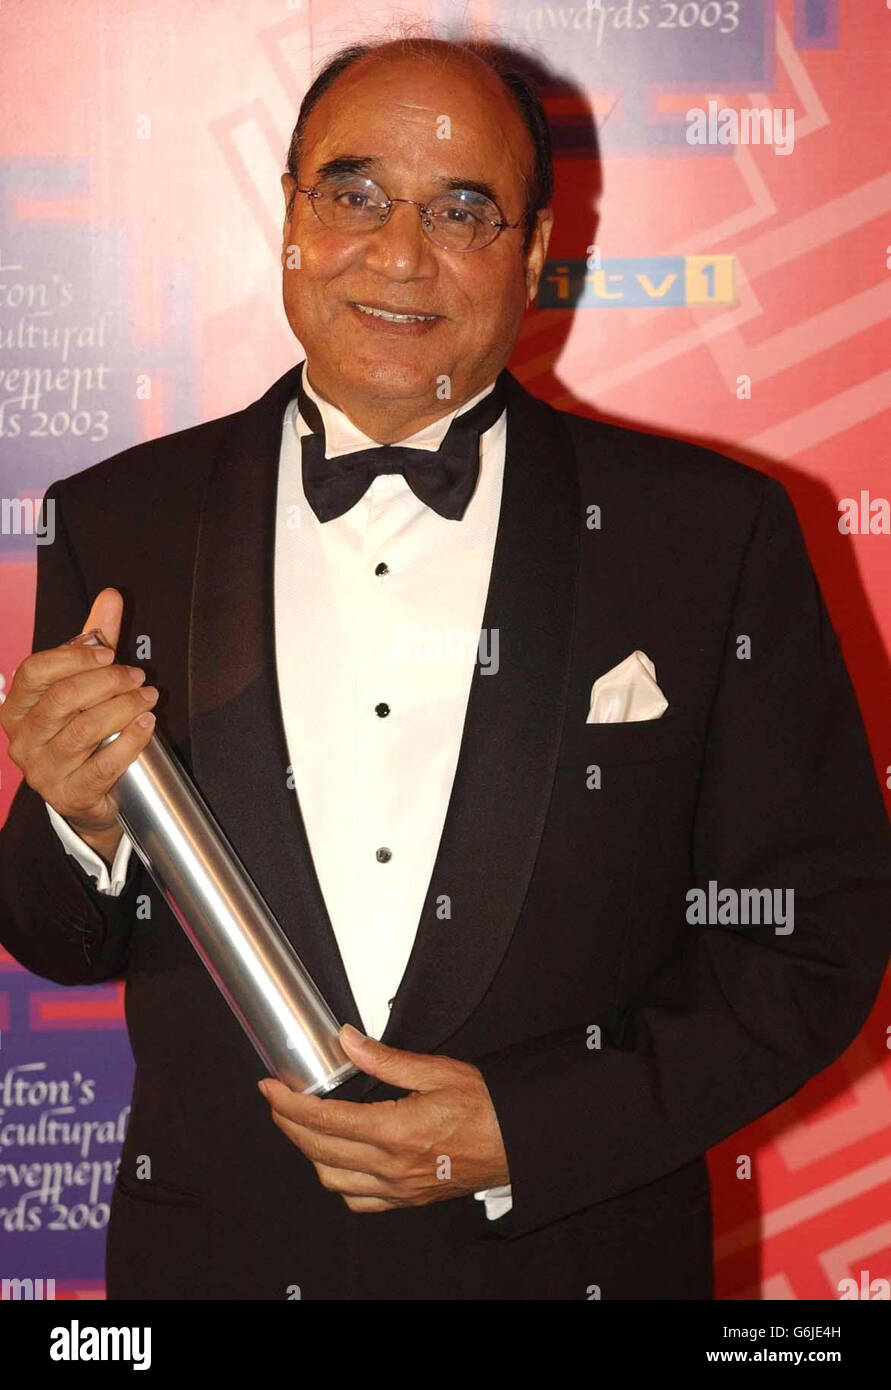 Anwar Pervez with his award for Outstanding Imput to Business during Carlton's Multicultural Achievement Awards 2003 at Po Na Na in west London. The annual event, now in its third year, recognises young people shaping modern Britain. Stock Photo